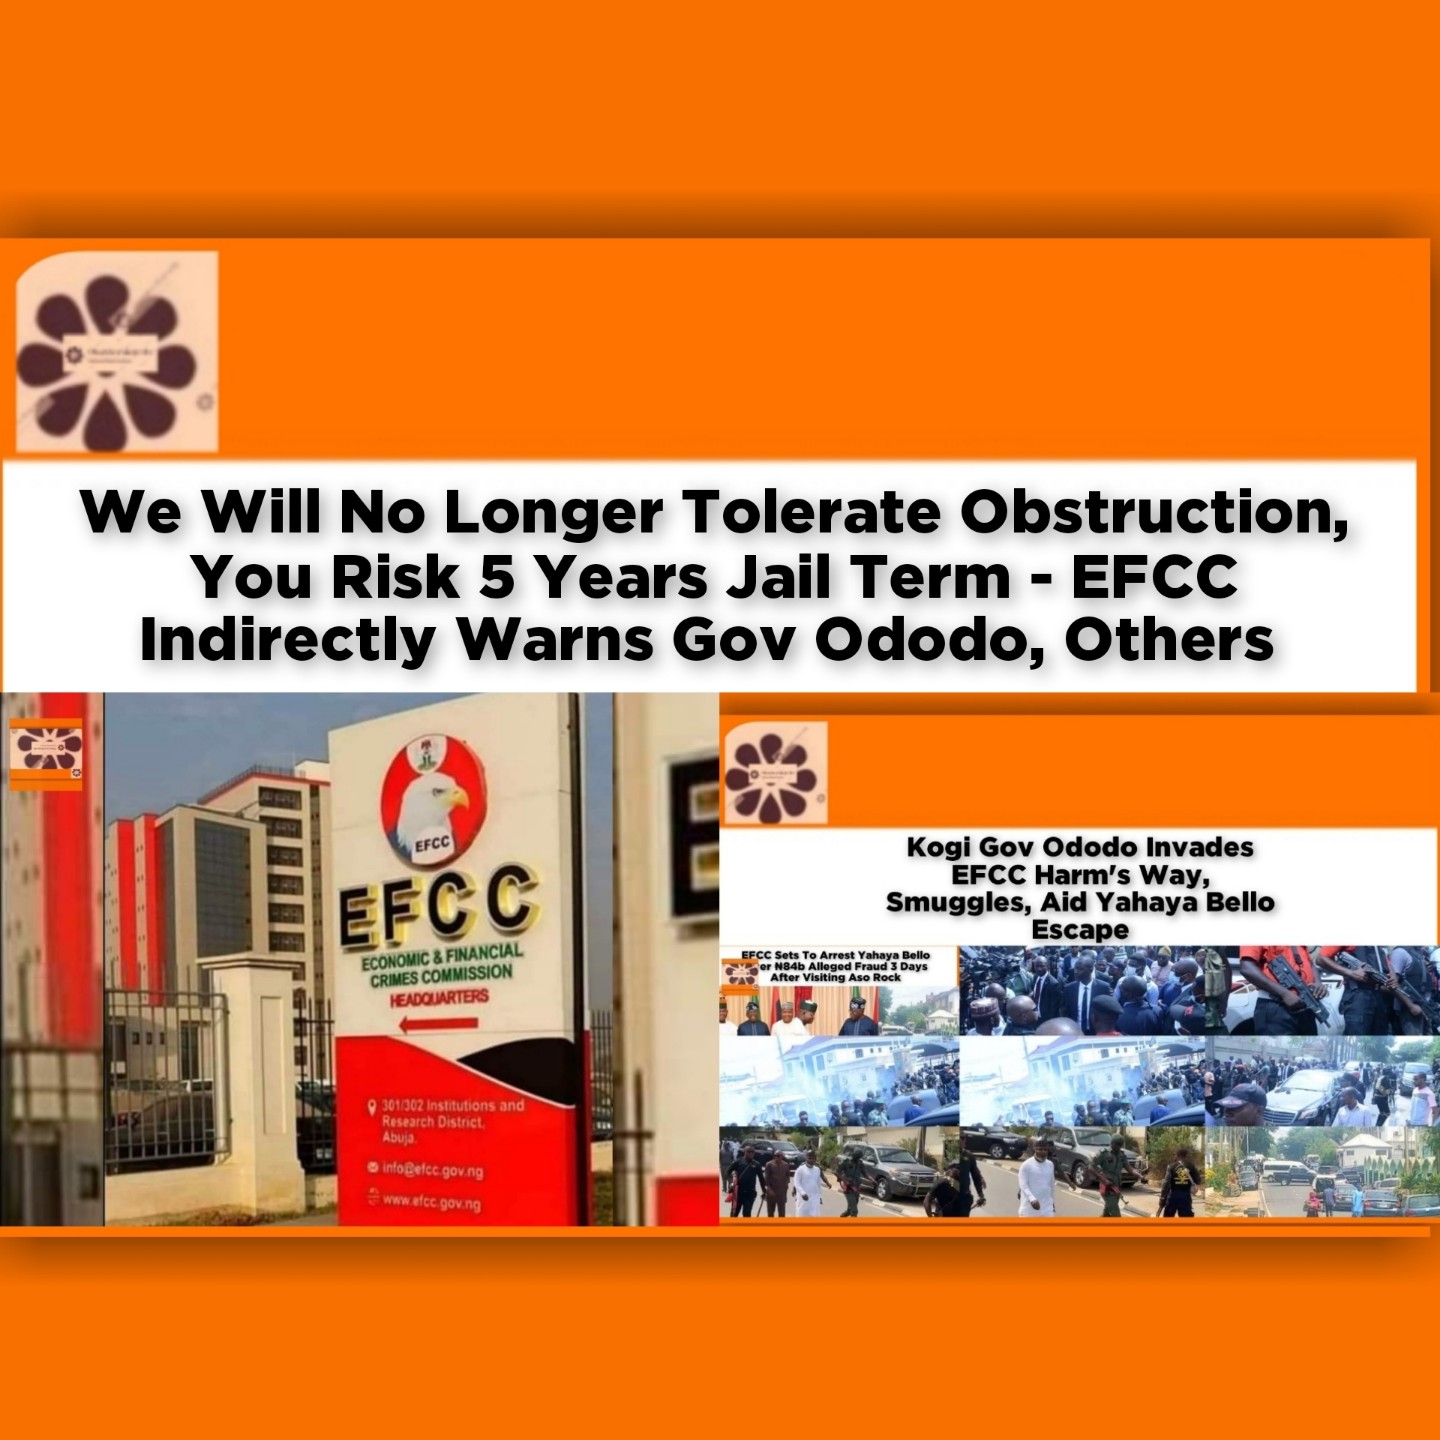 We Will No Longer Tolerate Obstruction, You Risk 5 Years Jail Term - EFCC Indirectly Warns Gov Ododo, Others ~ OsazuwaAkonedo news